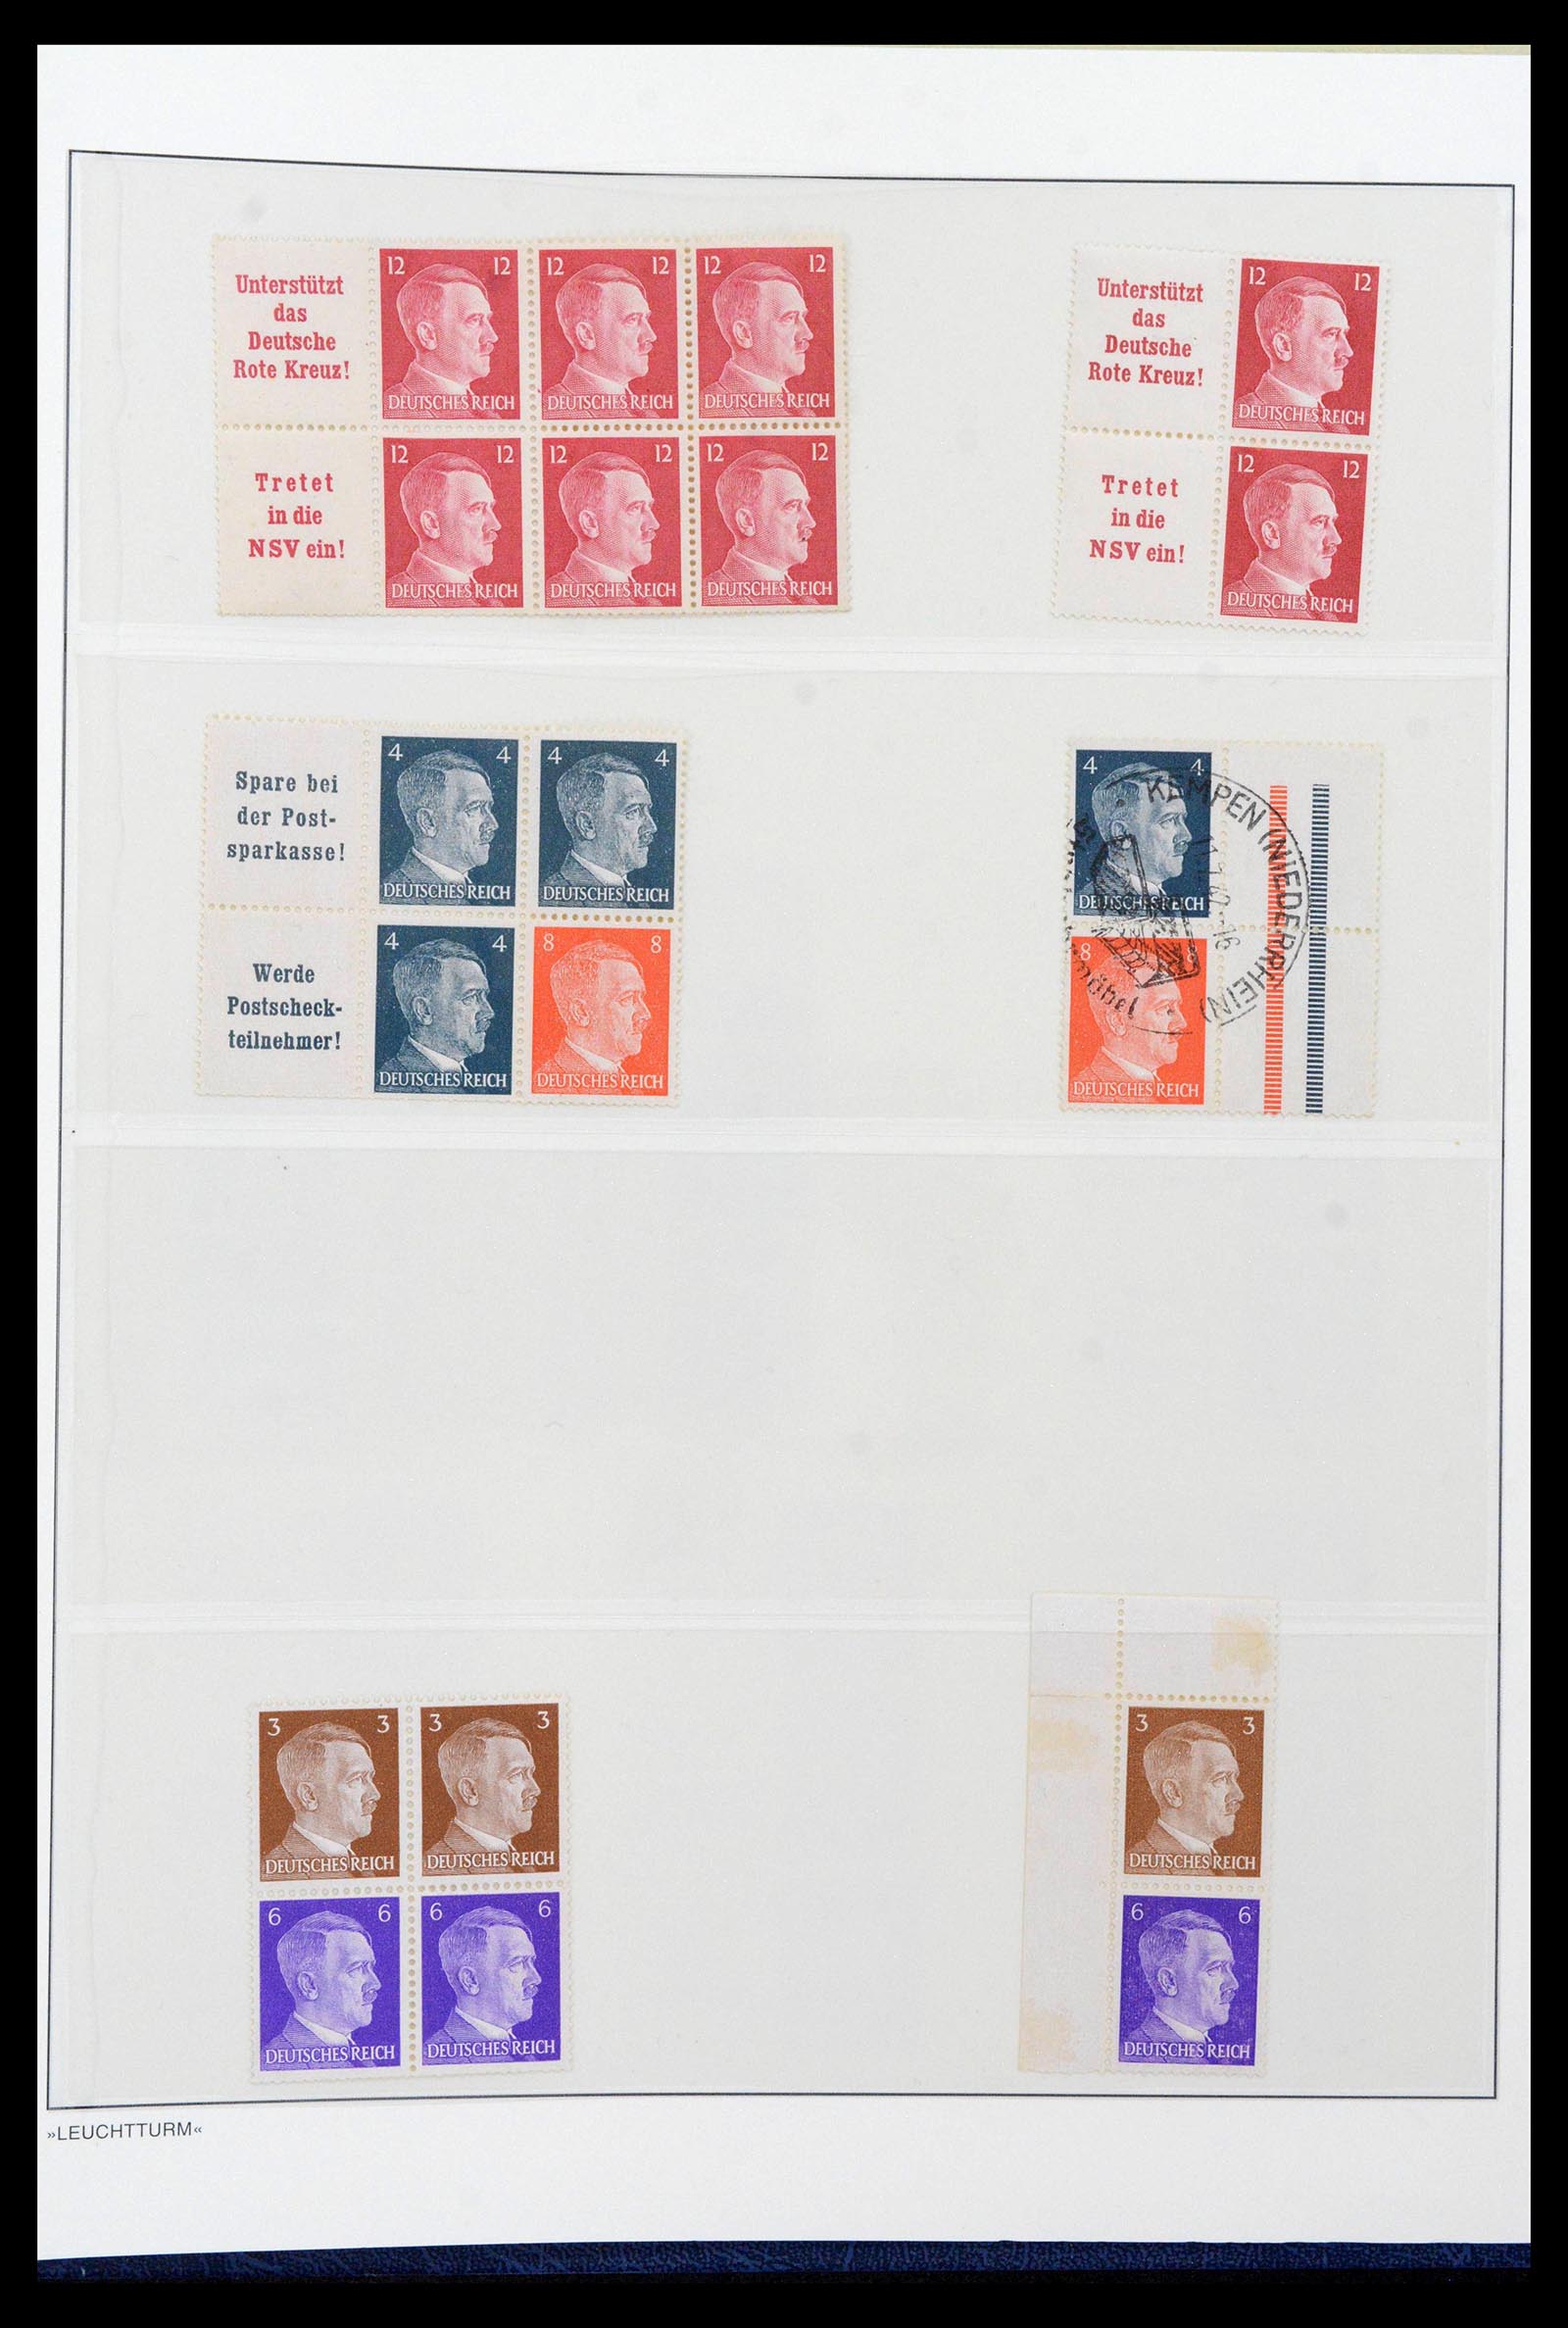 39045 0086 - Stamp collection 39045 German Reich combinations 1913-1941.